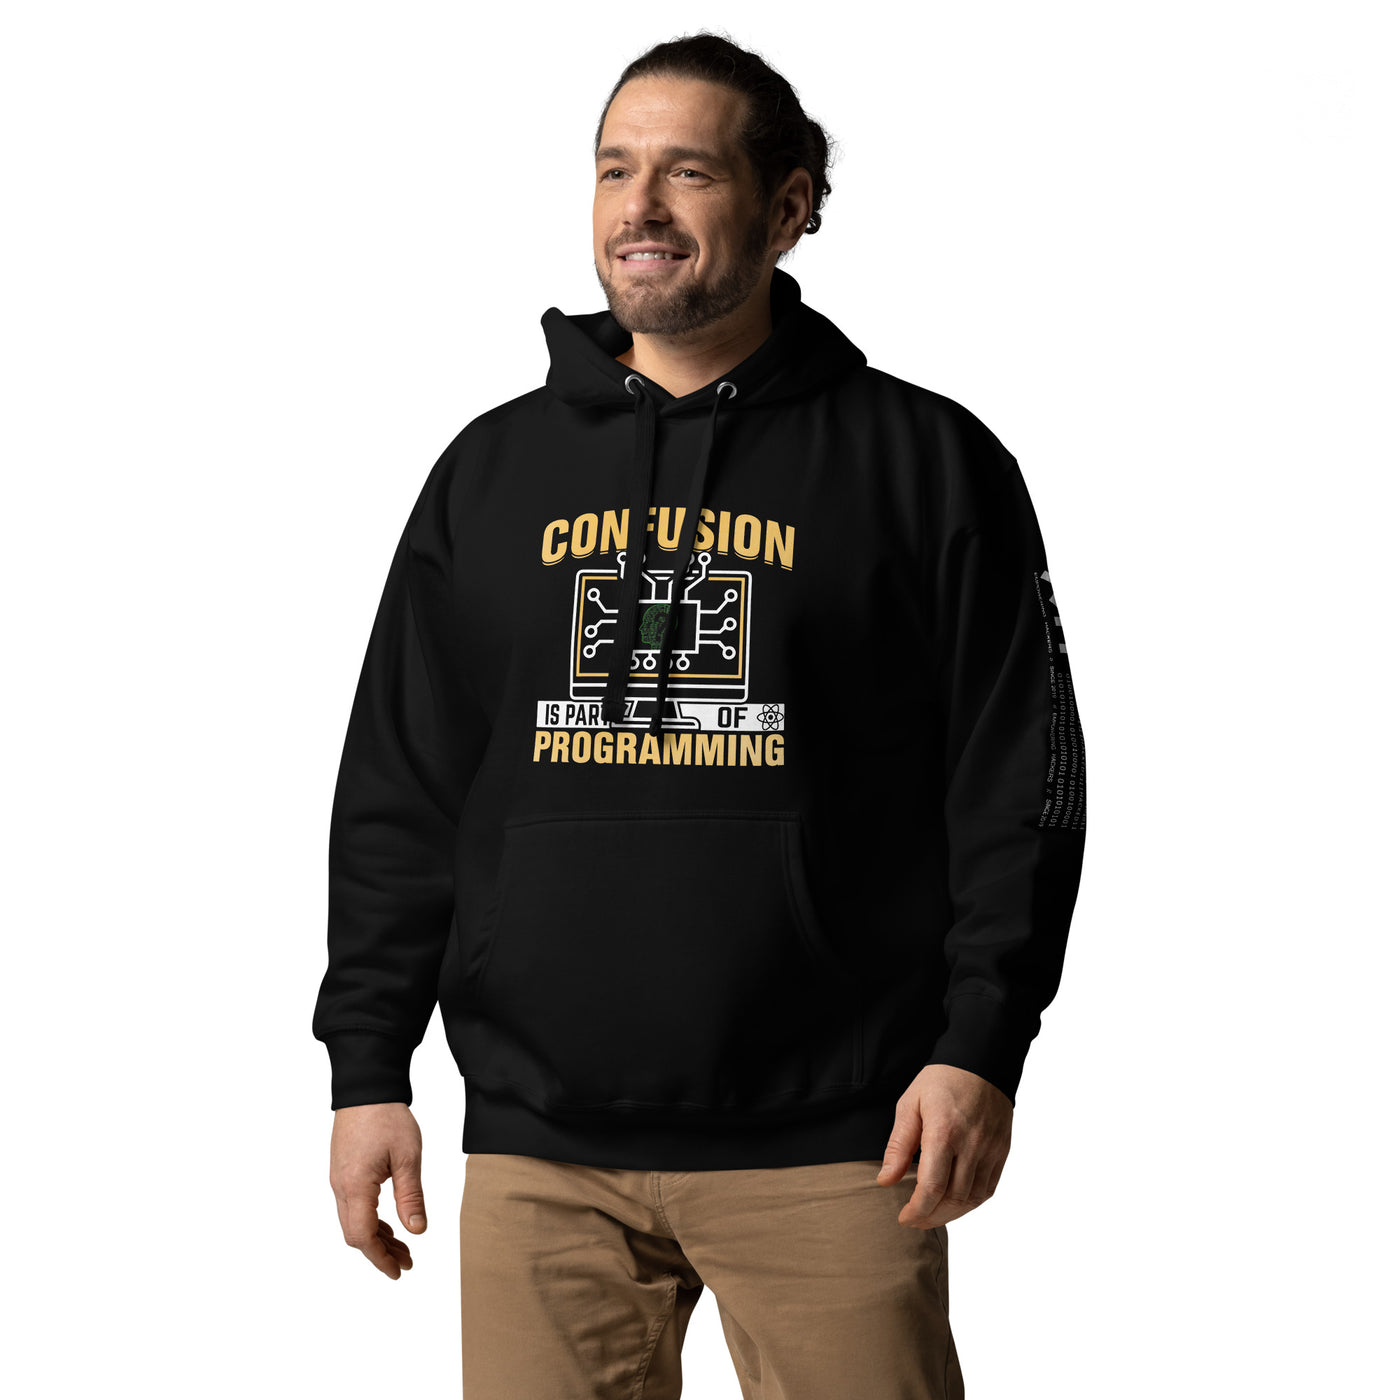 Confusion is Part of Programming Unisex Hoodie